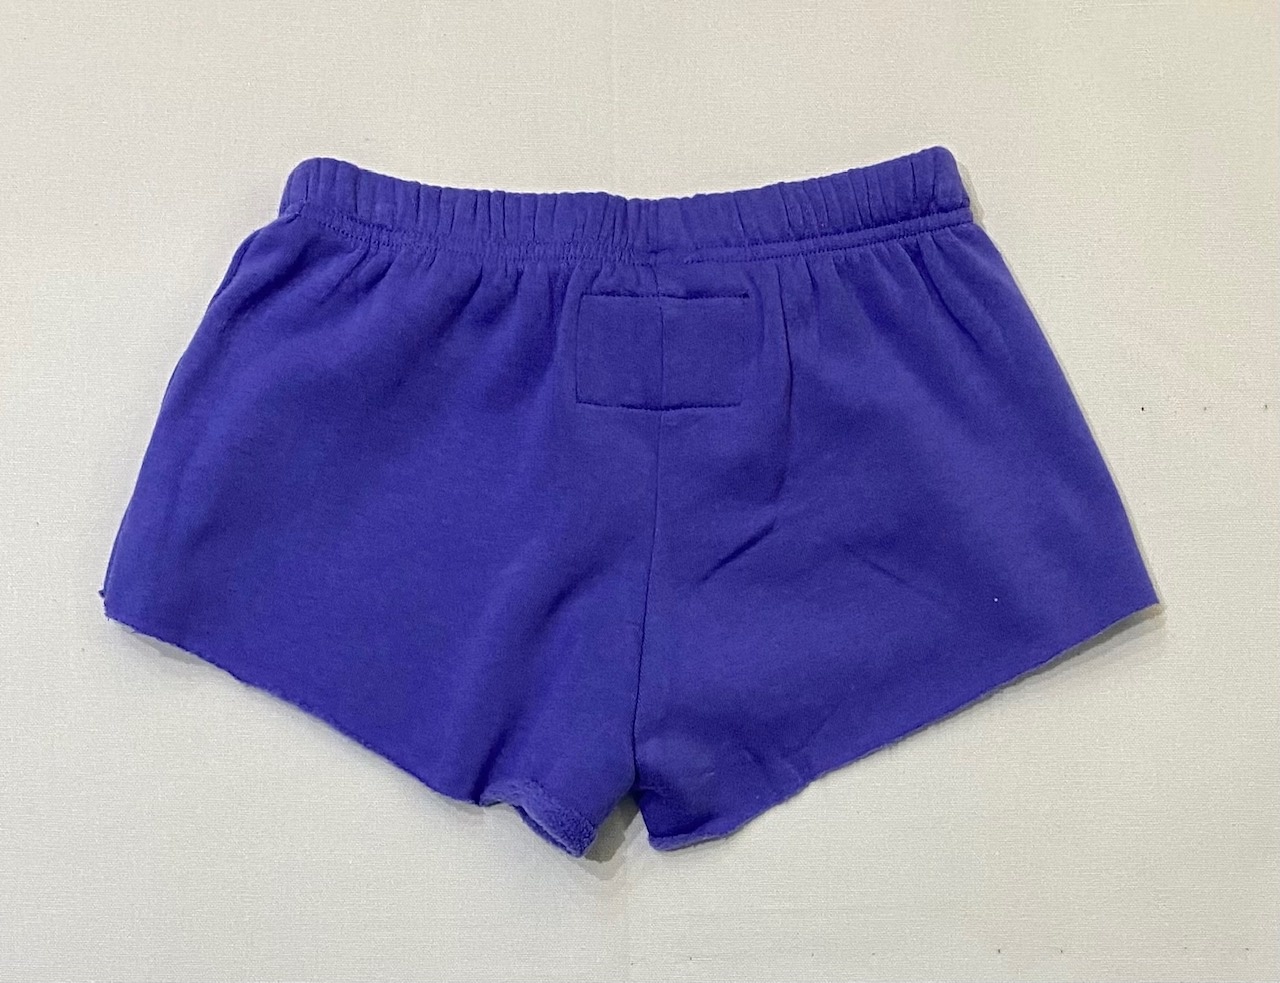 KatieJ NYC Dylan Shorts-Periwinkle Blue